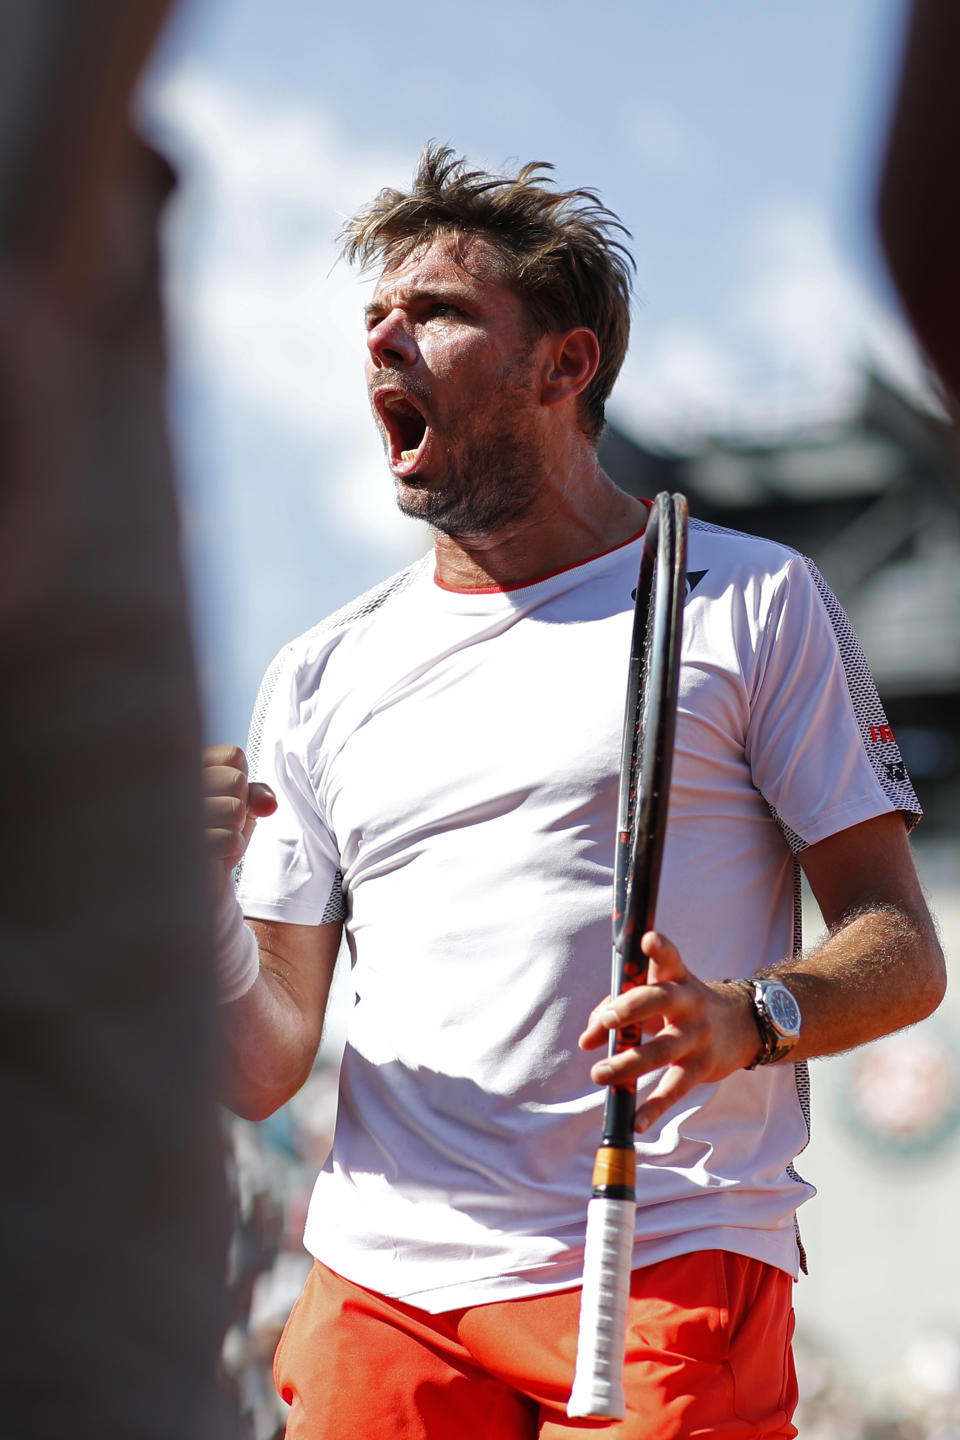 Switzerland's Stan Wawrinka screams after scoring a point against Greece's Stefanos Tsitsipas during their fourth round match of the French Open tennis tournament at the Roland Garros stadium in Paris, Sunday, June 2, 2019. (AP Photo/Christophe Ena )